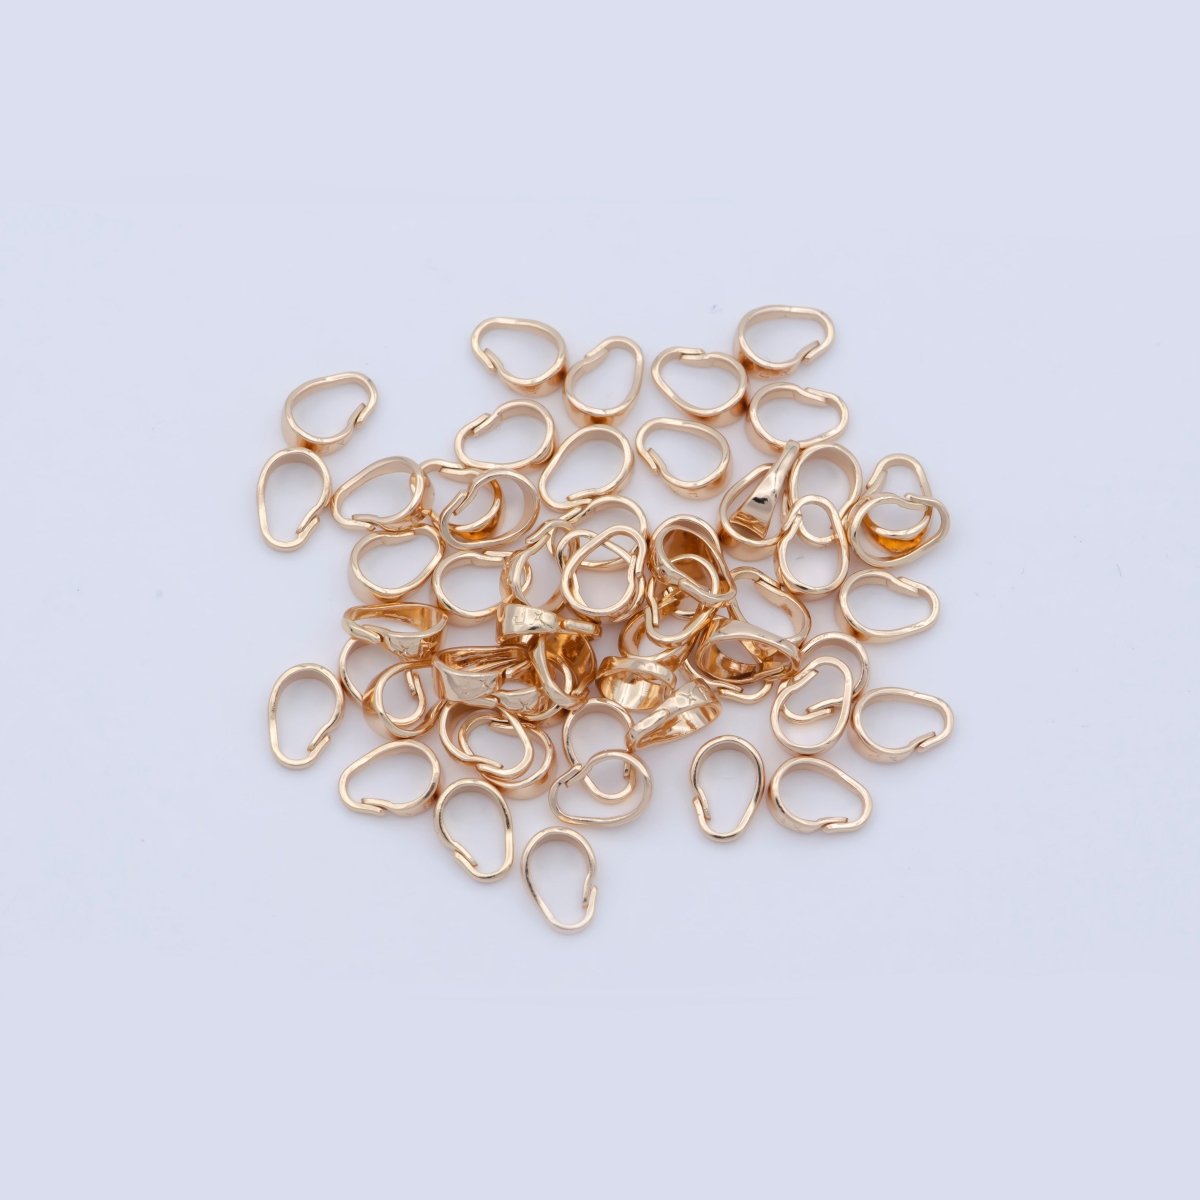 1x Gold Filled bail snap-on for pendant and charm. Perfect for Necklace Anklet Bracelet Jewelry Making wholesale Finding Component - DLUXCA